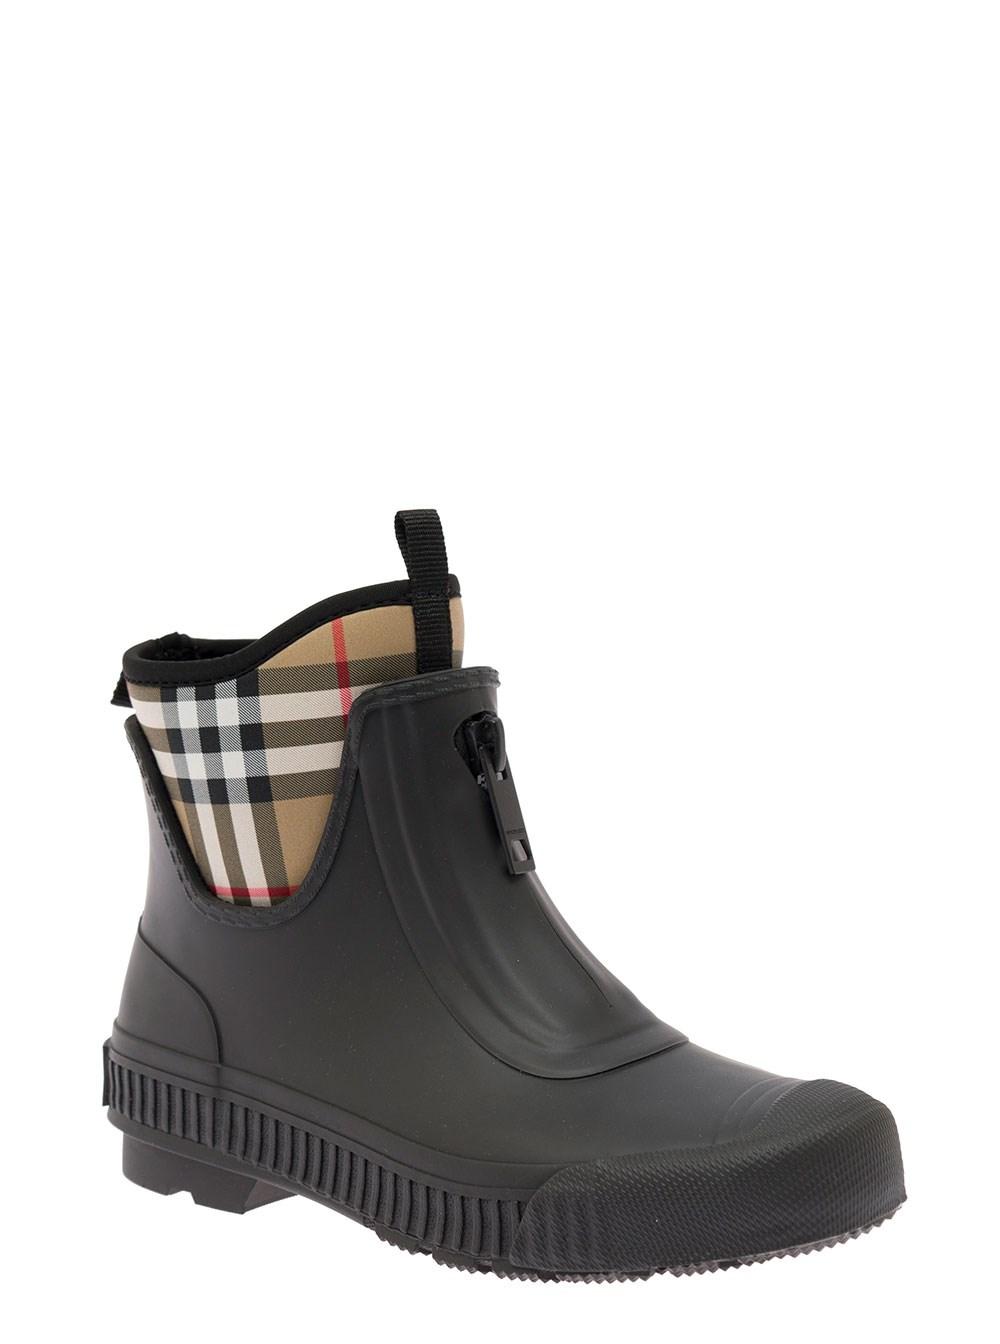 Burberry Woman's Rubber Boots With Vintage Check Inserts in Black | Lyst